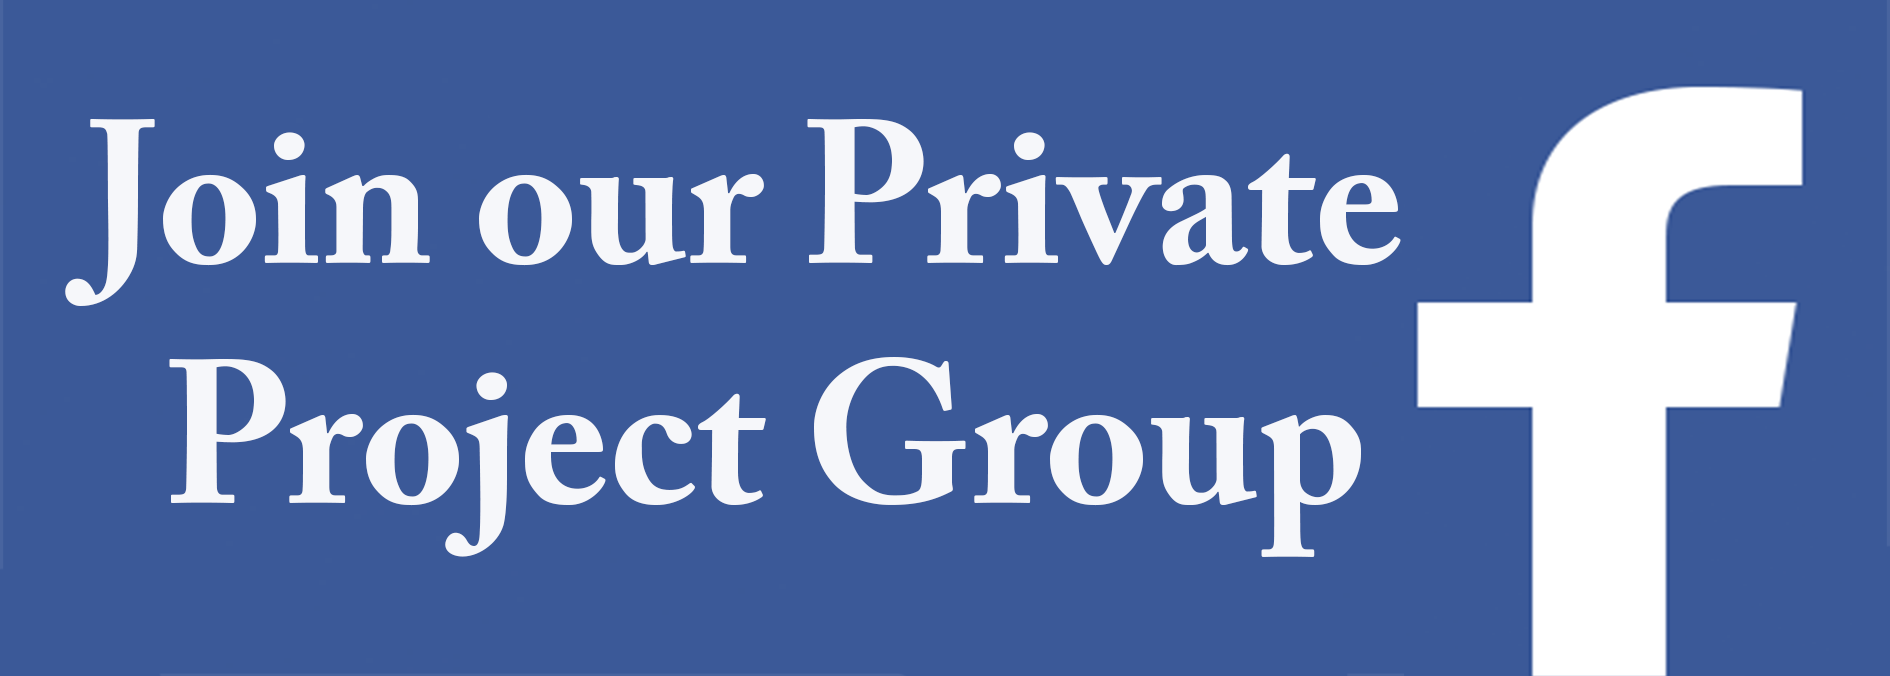 join our private project group